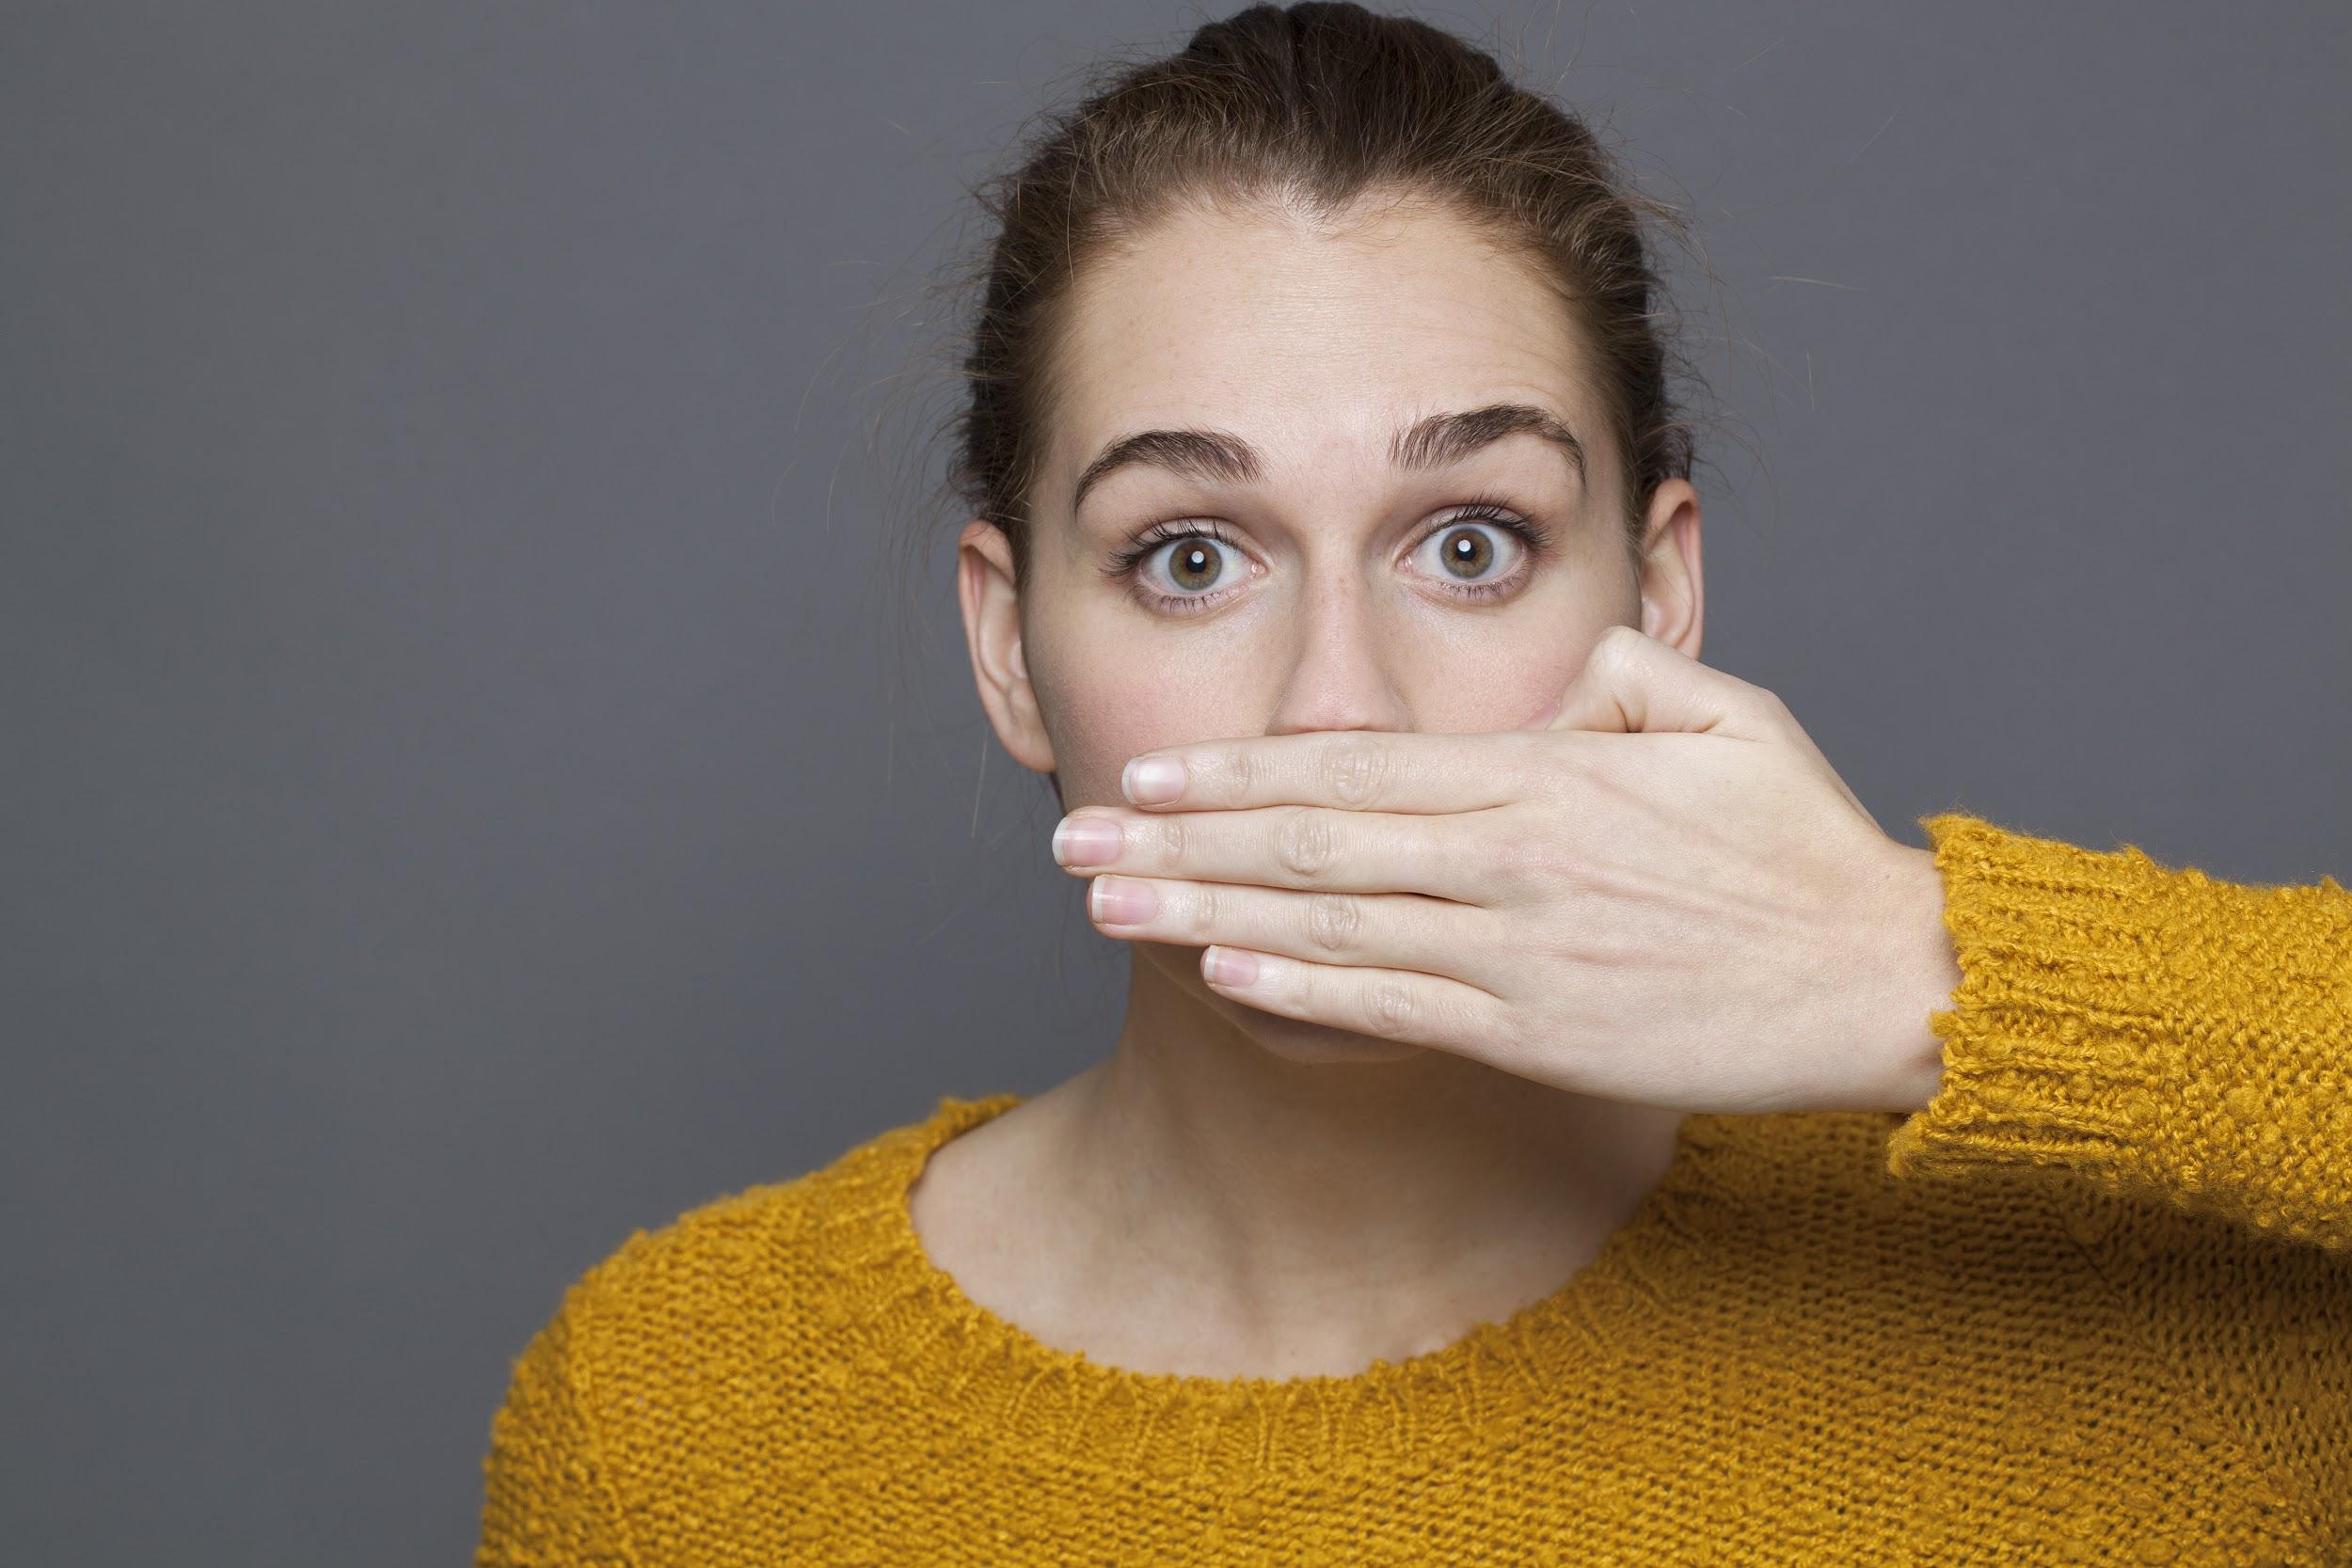 Bad Breath And Ways To Get Rid Of It